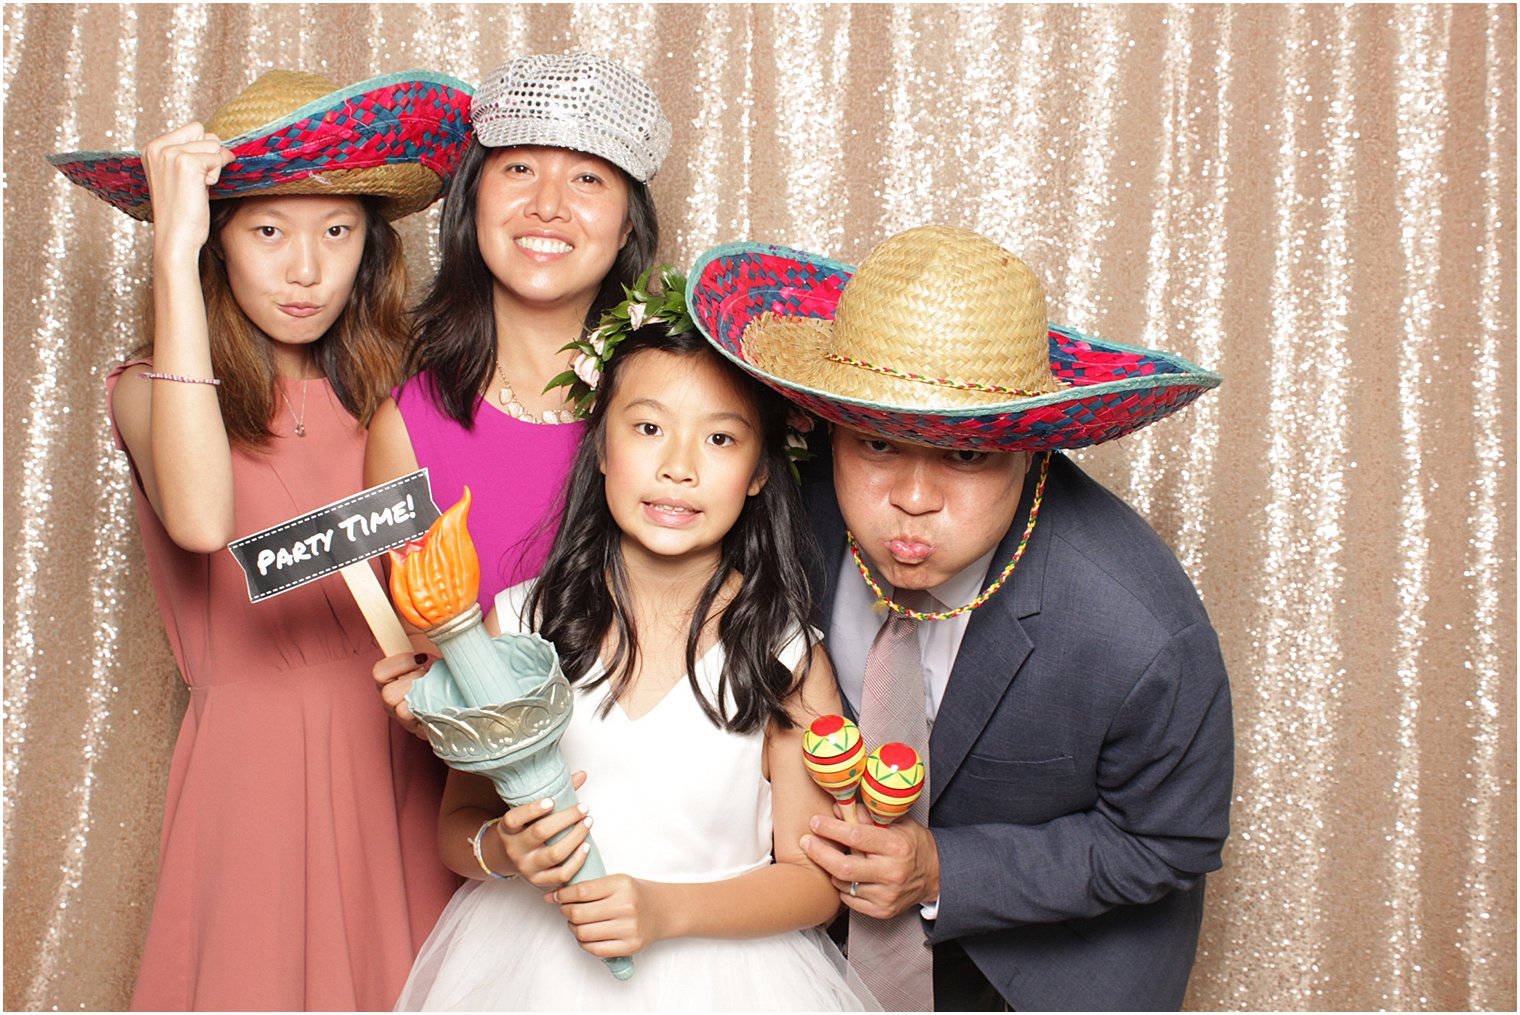 wedding guests pose in photobooth during NJ wedding reception